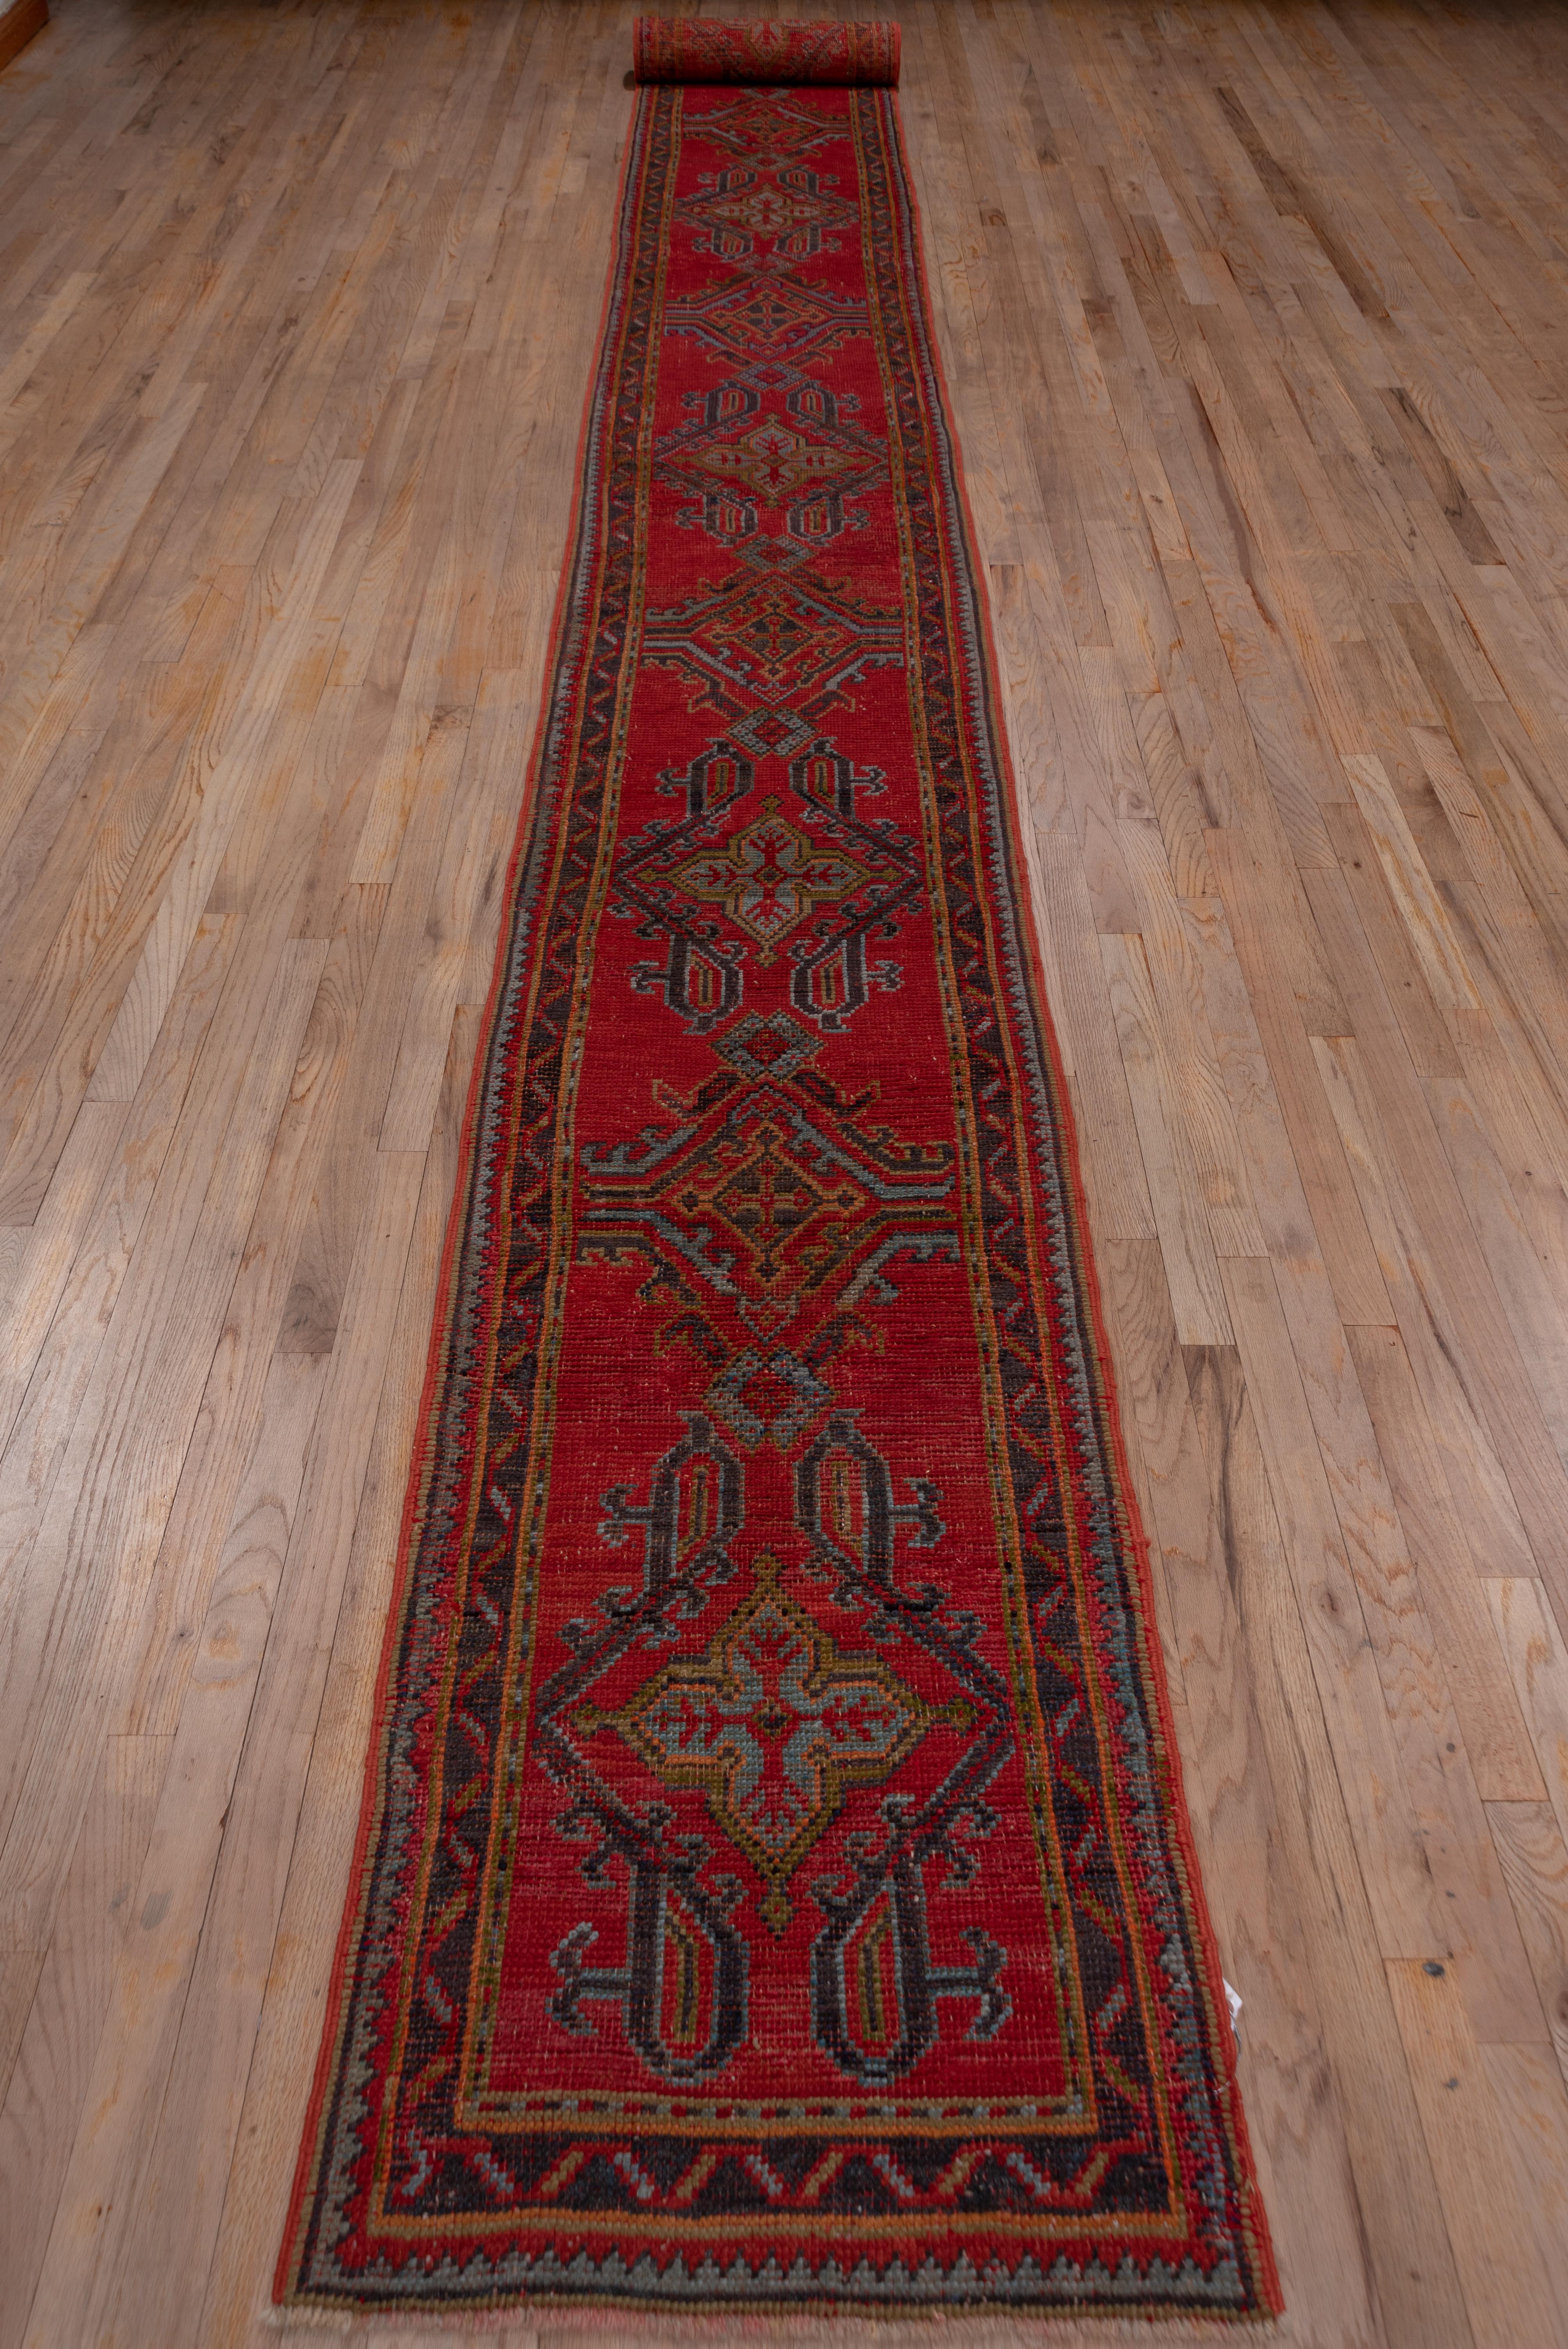 The Turkey red field of this western Anatolian town runner displays the Classic Yaprak (leaf) pattern in dark green, light blue and rusty orange while the forest green main border has a zig-zag motif.